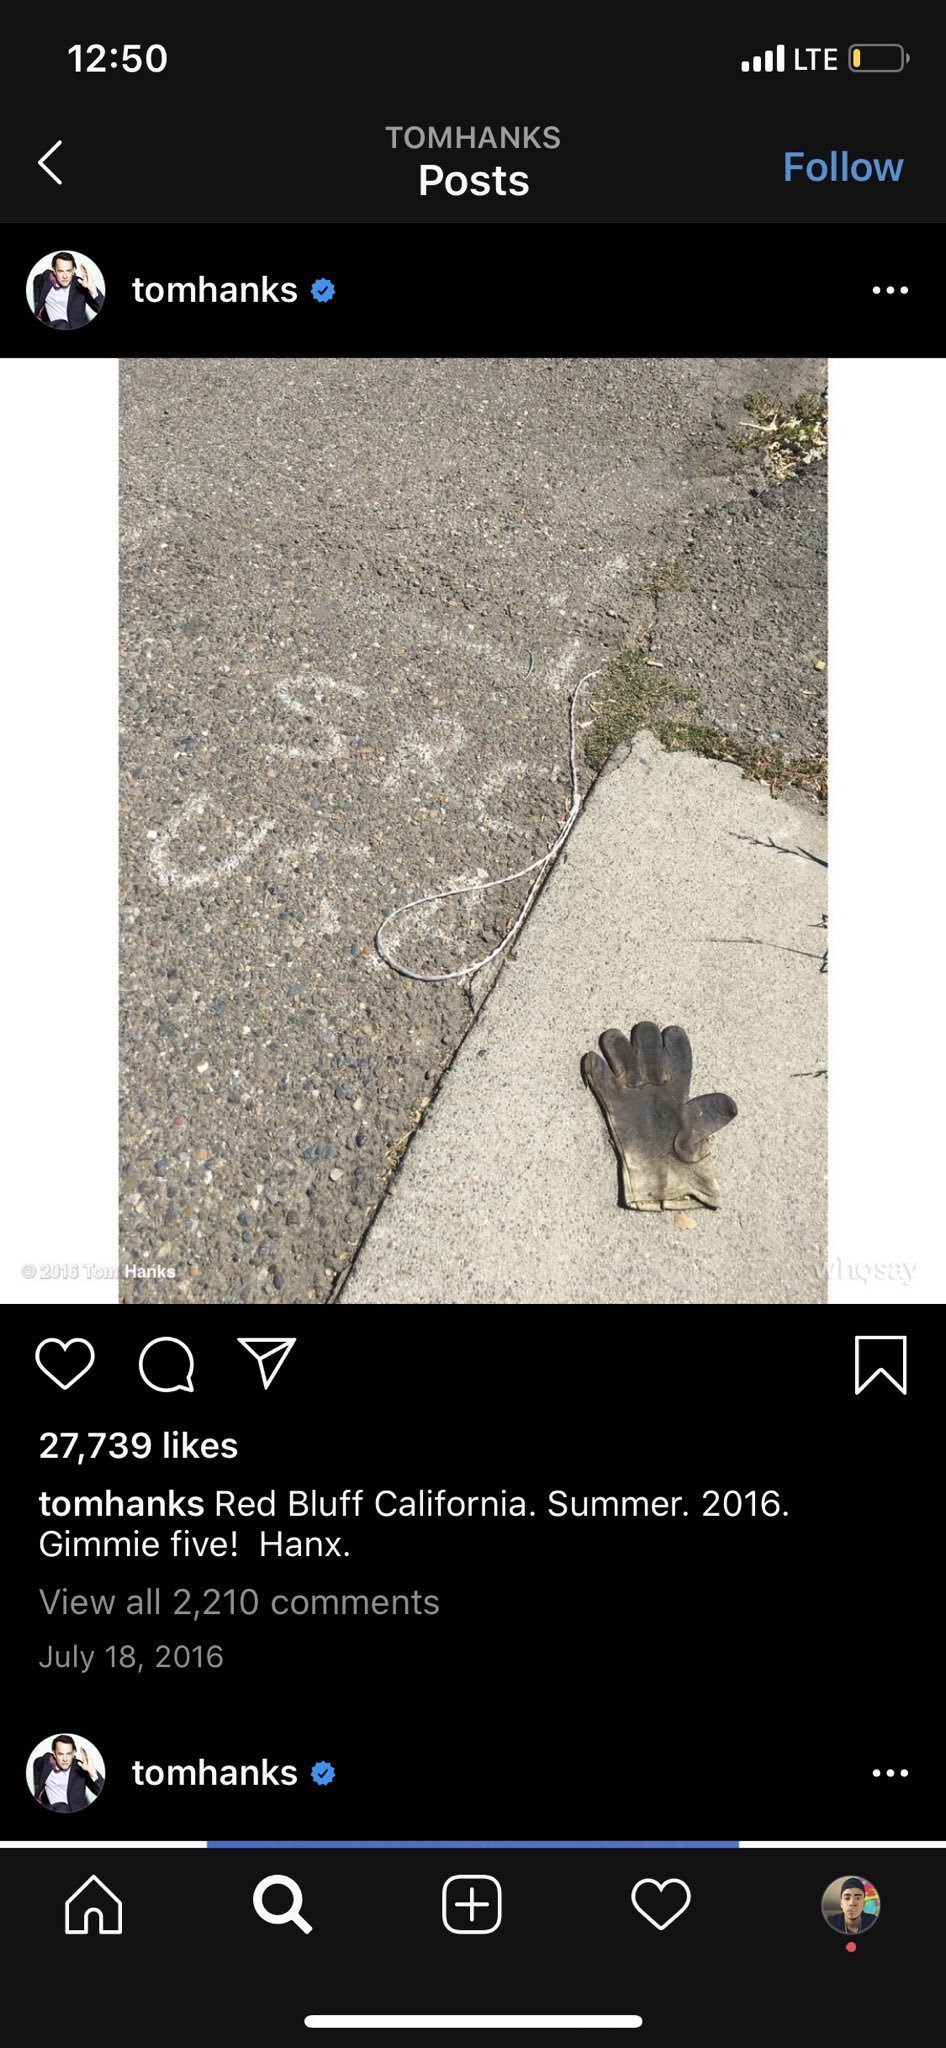 Tom Hanks posted a creepy photo of a single glove on his Twitter page.